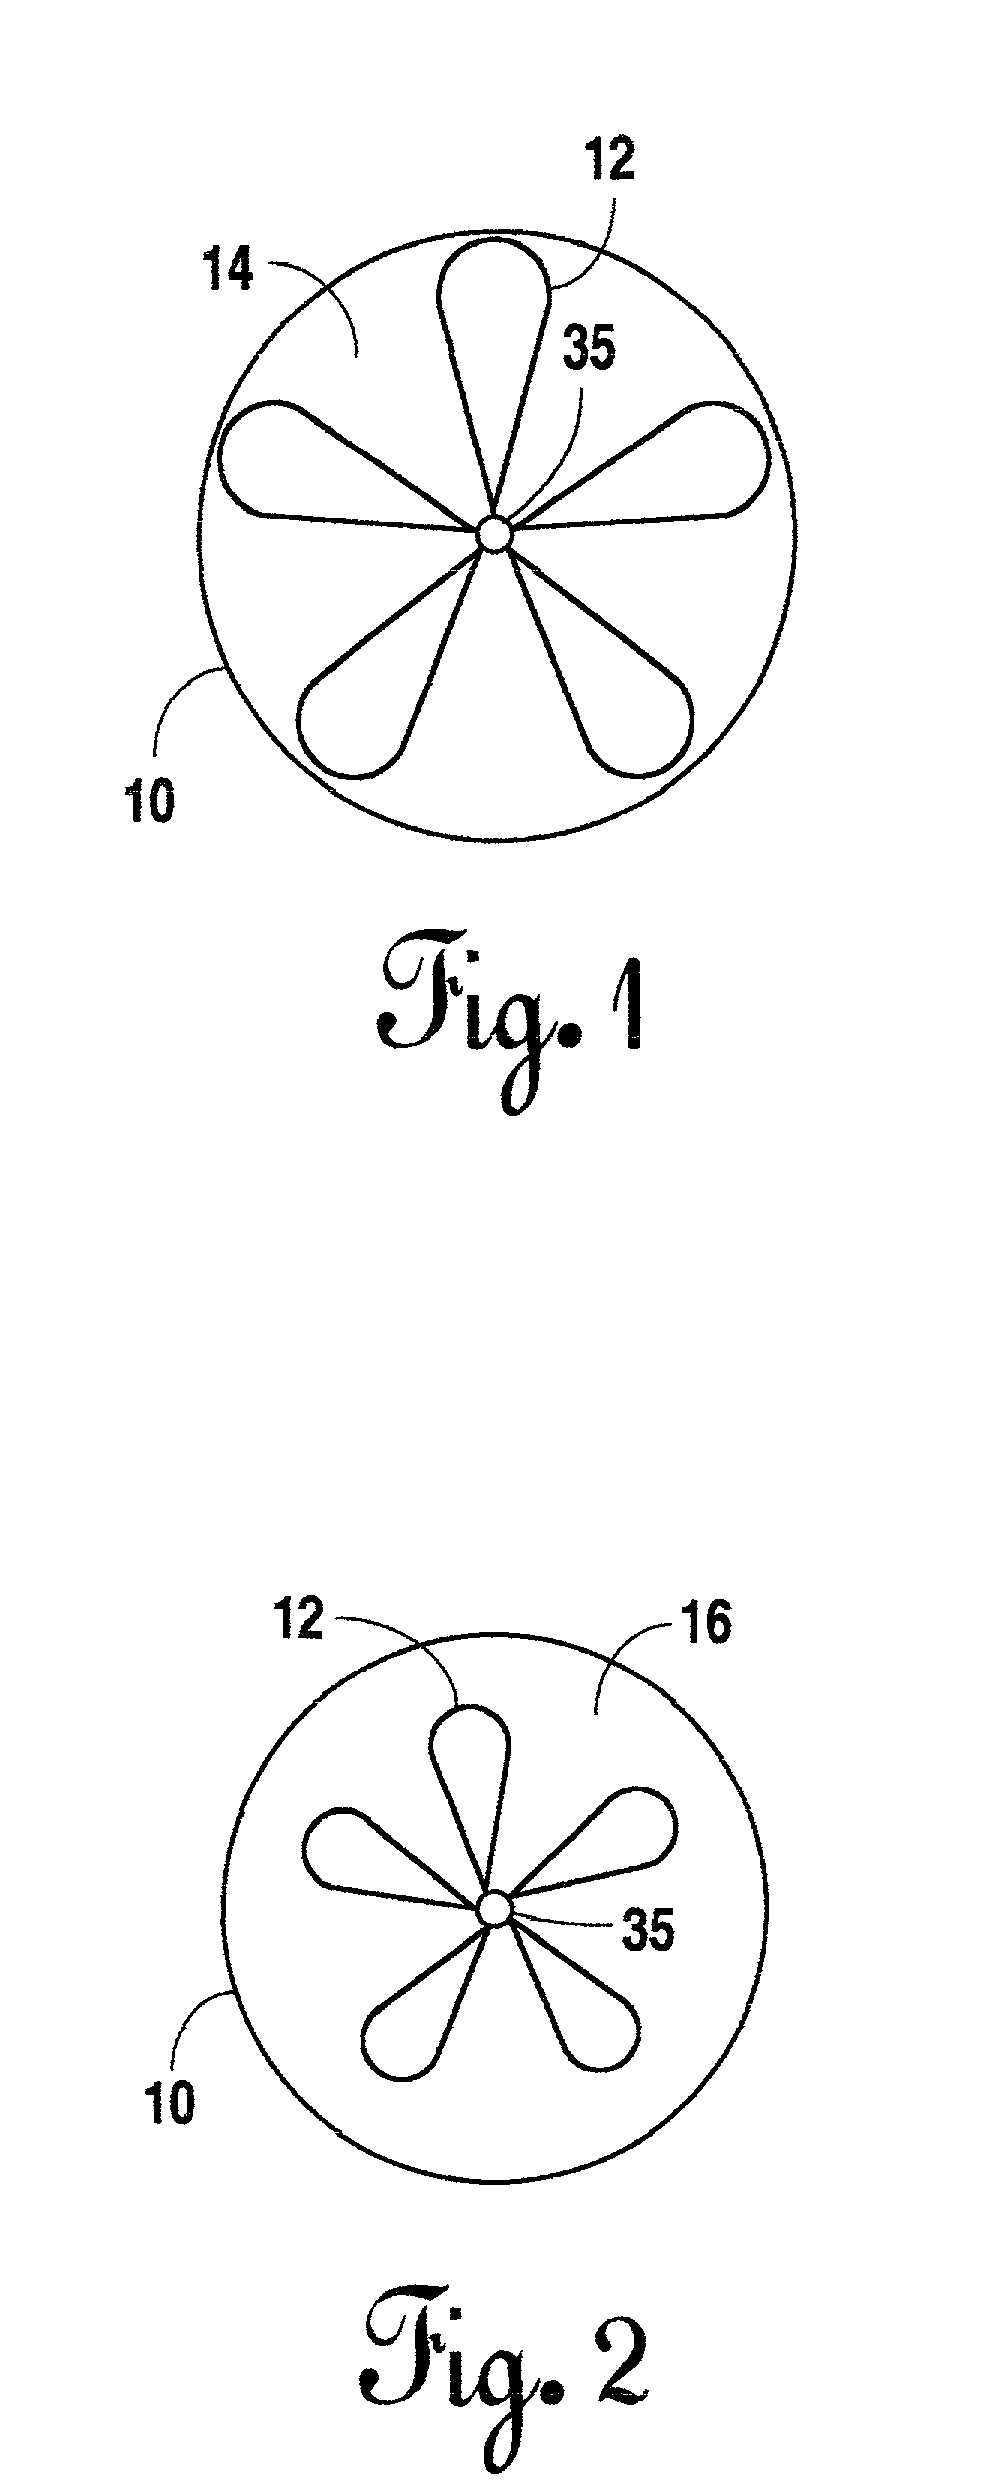 Method and apparatus for operating a diesel engine under stoichiometric or slightly fuel-rich conditions